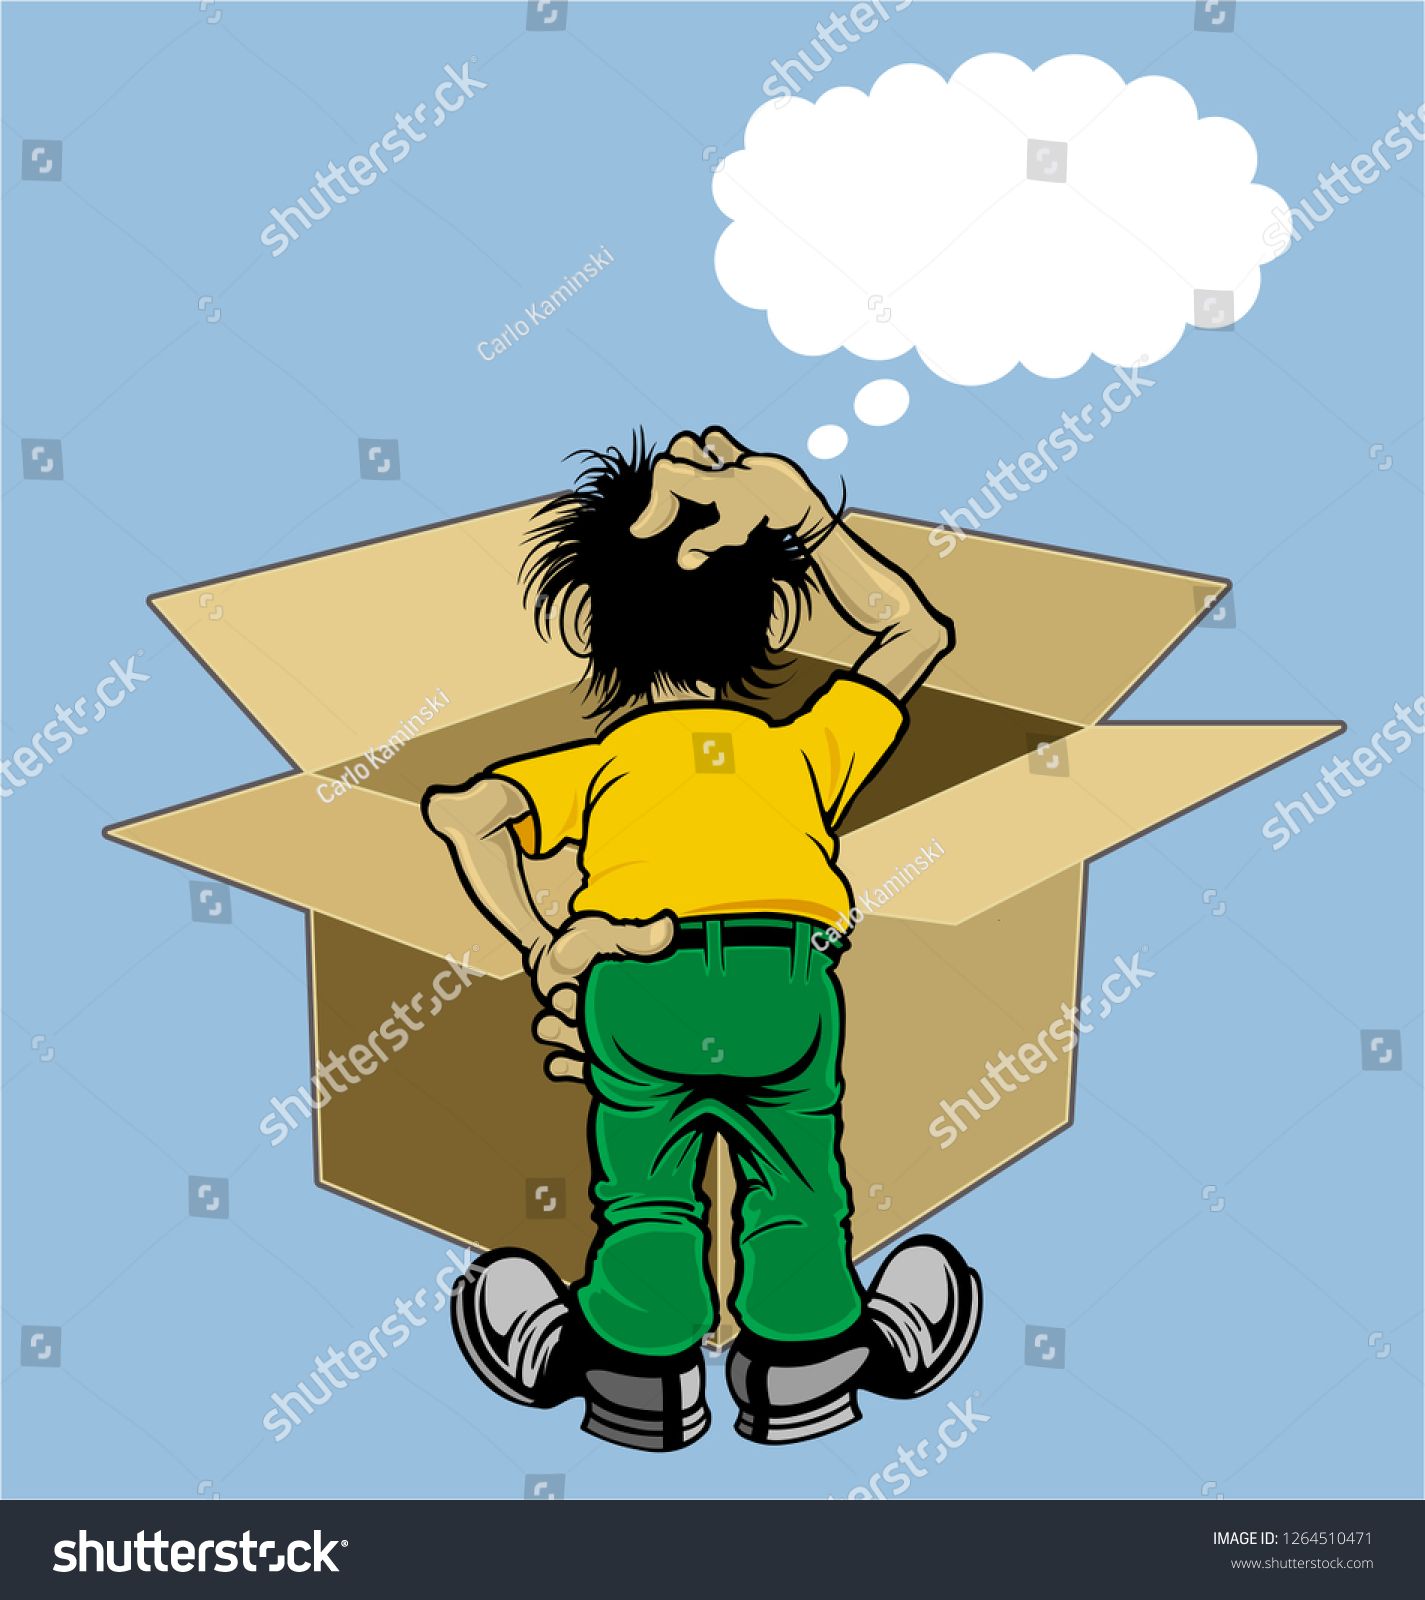 Thinking outside the box cartoon (also thinking out of the box or thinking beyond the box) is a metaphor that means to think differently, unconventionally, or from a new perspective. #1264510471